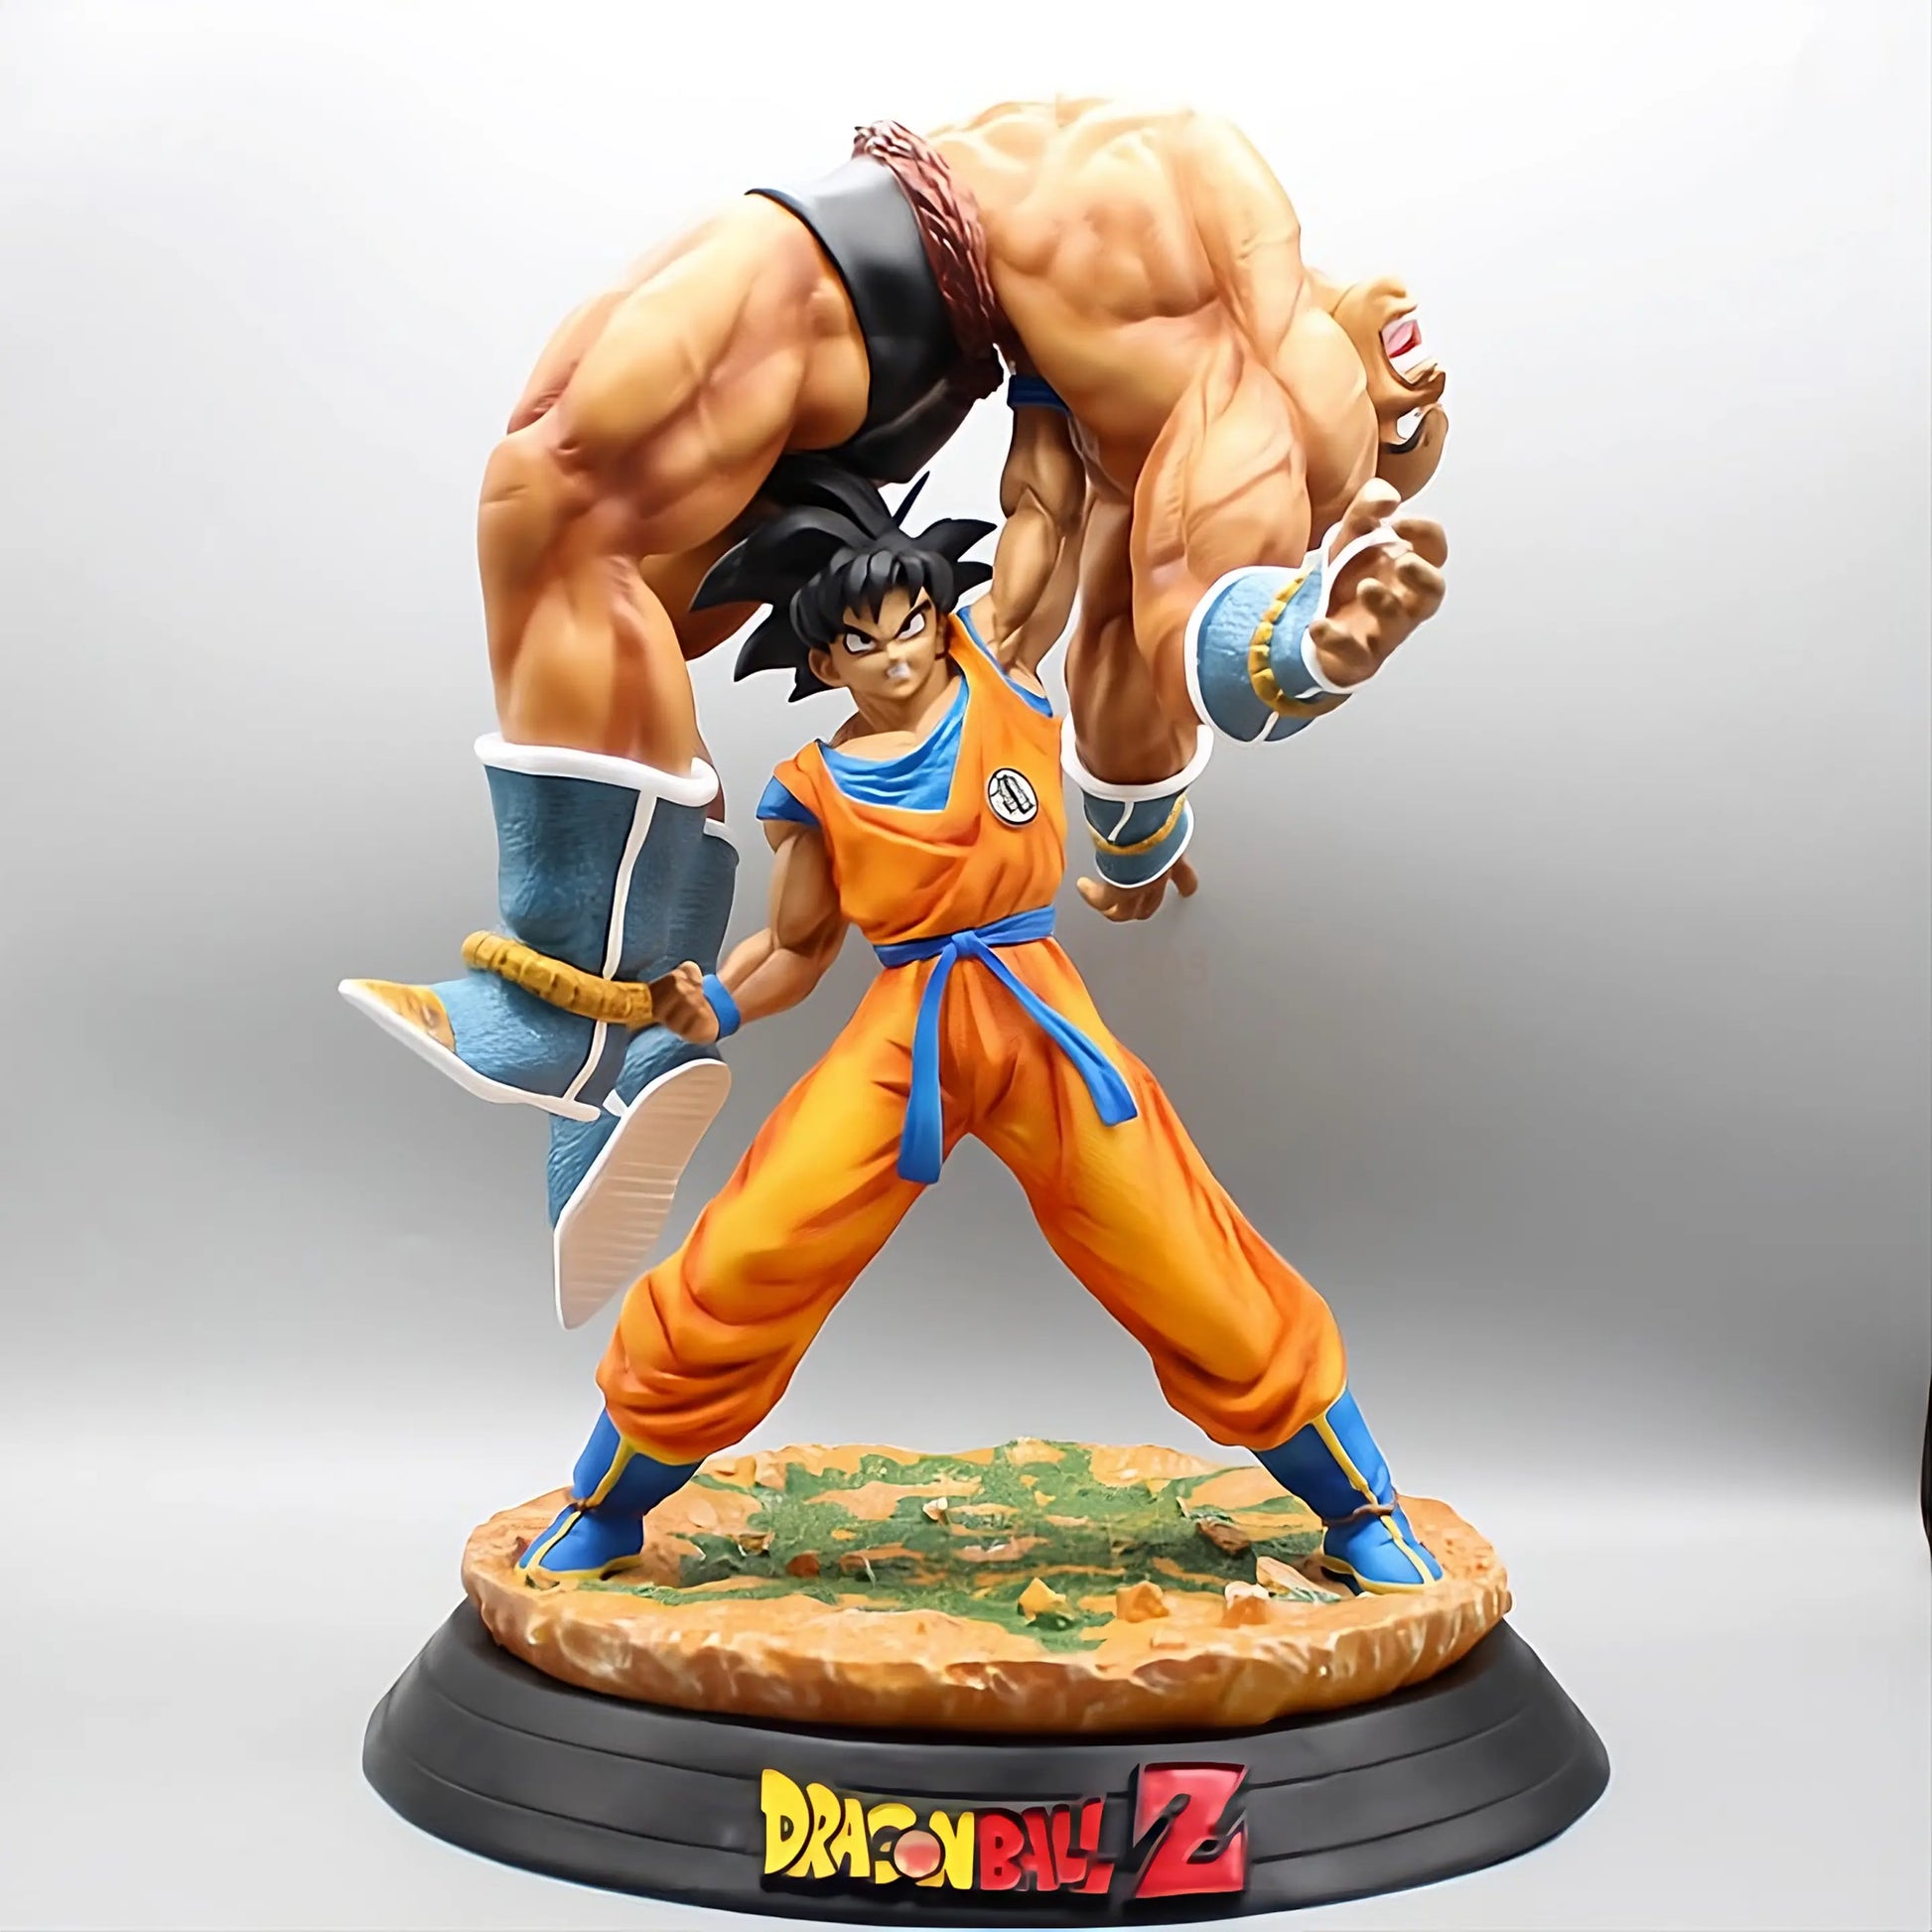 Dragon Ball Z collectible figure capturing the intense moment with Goku overpowering Nappa, depicted with detailed musculature and dynamic action pose.